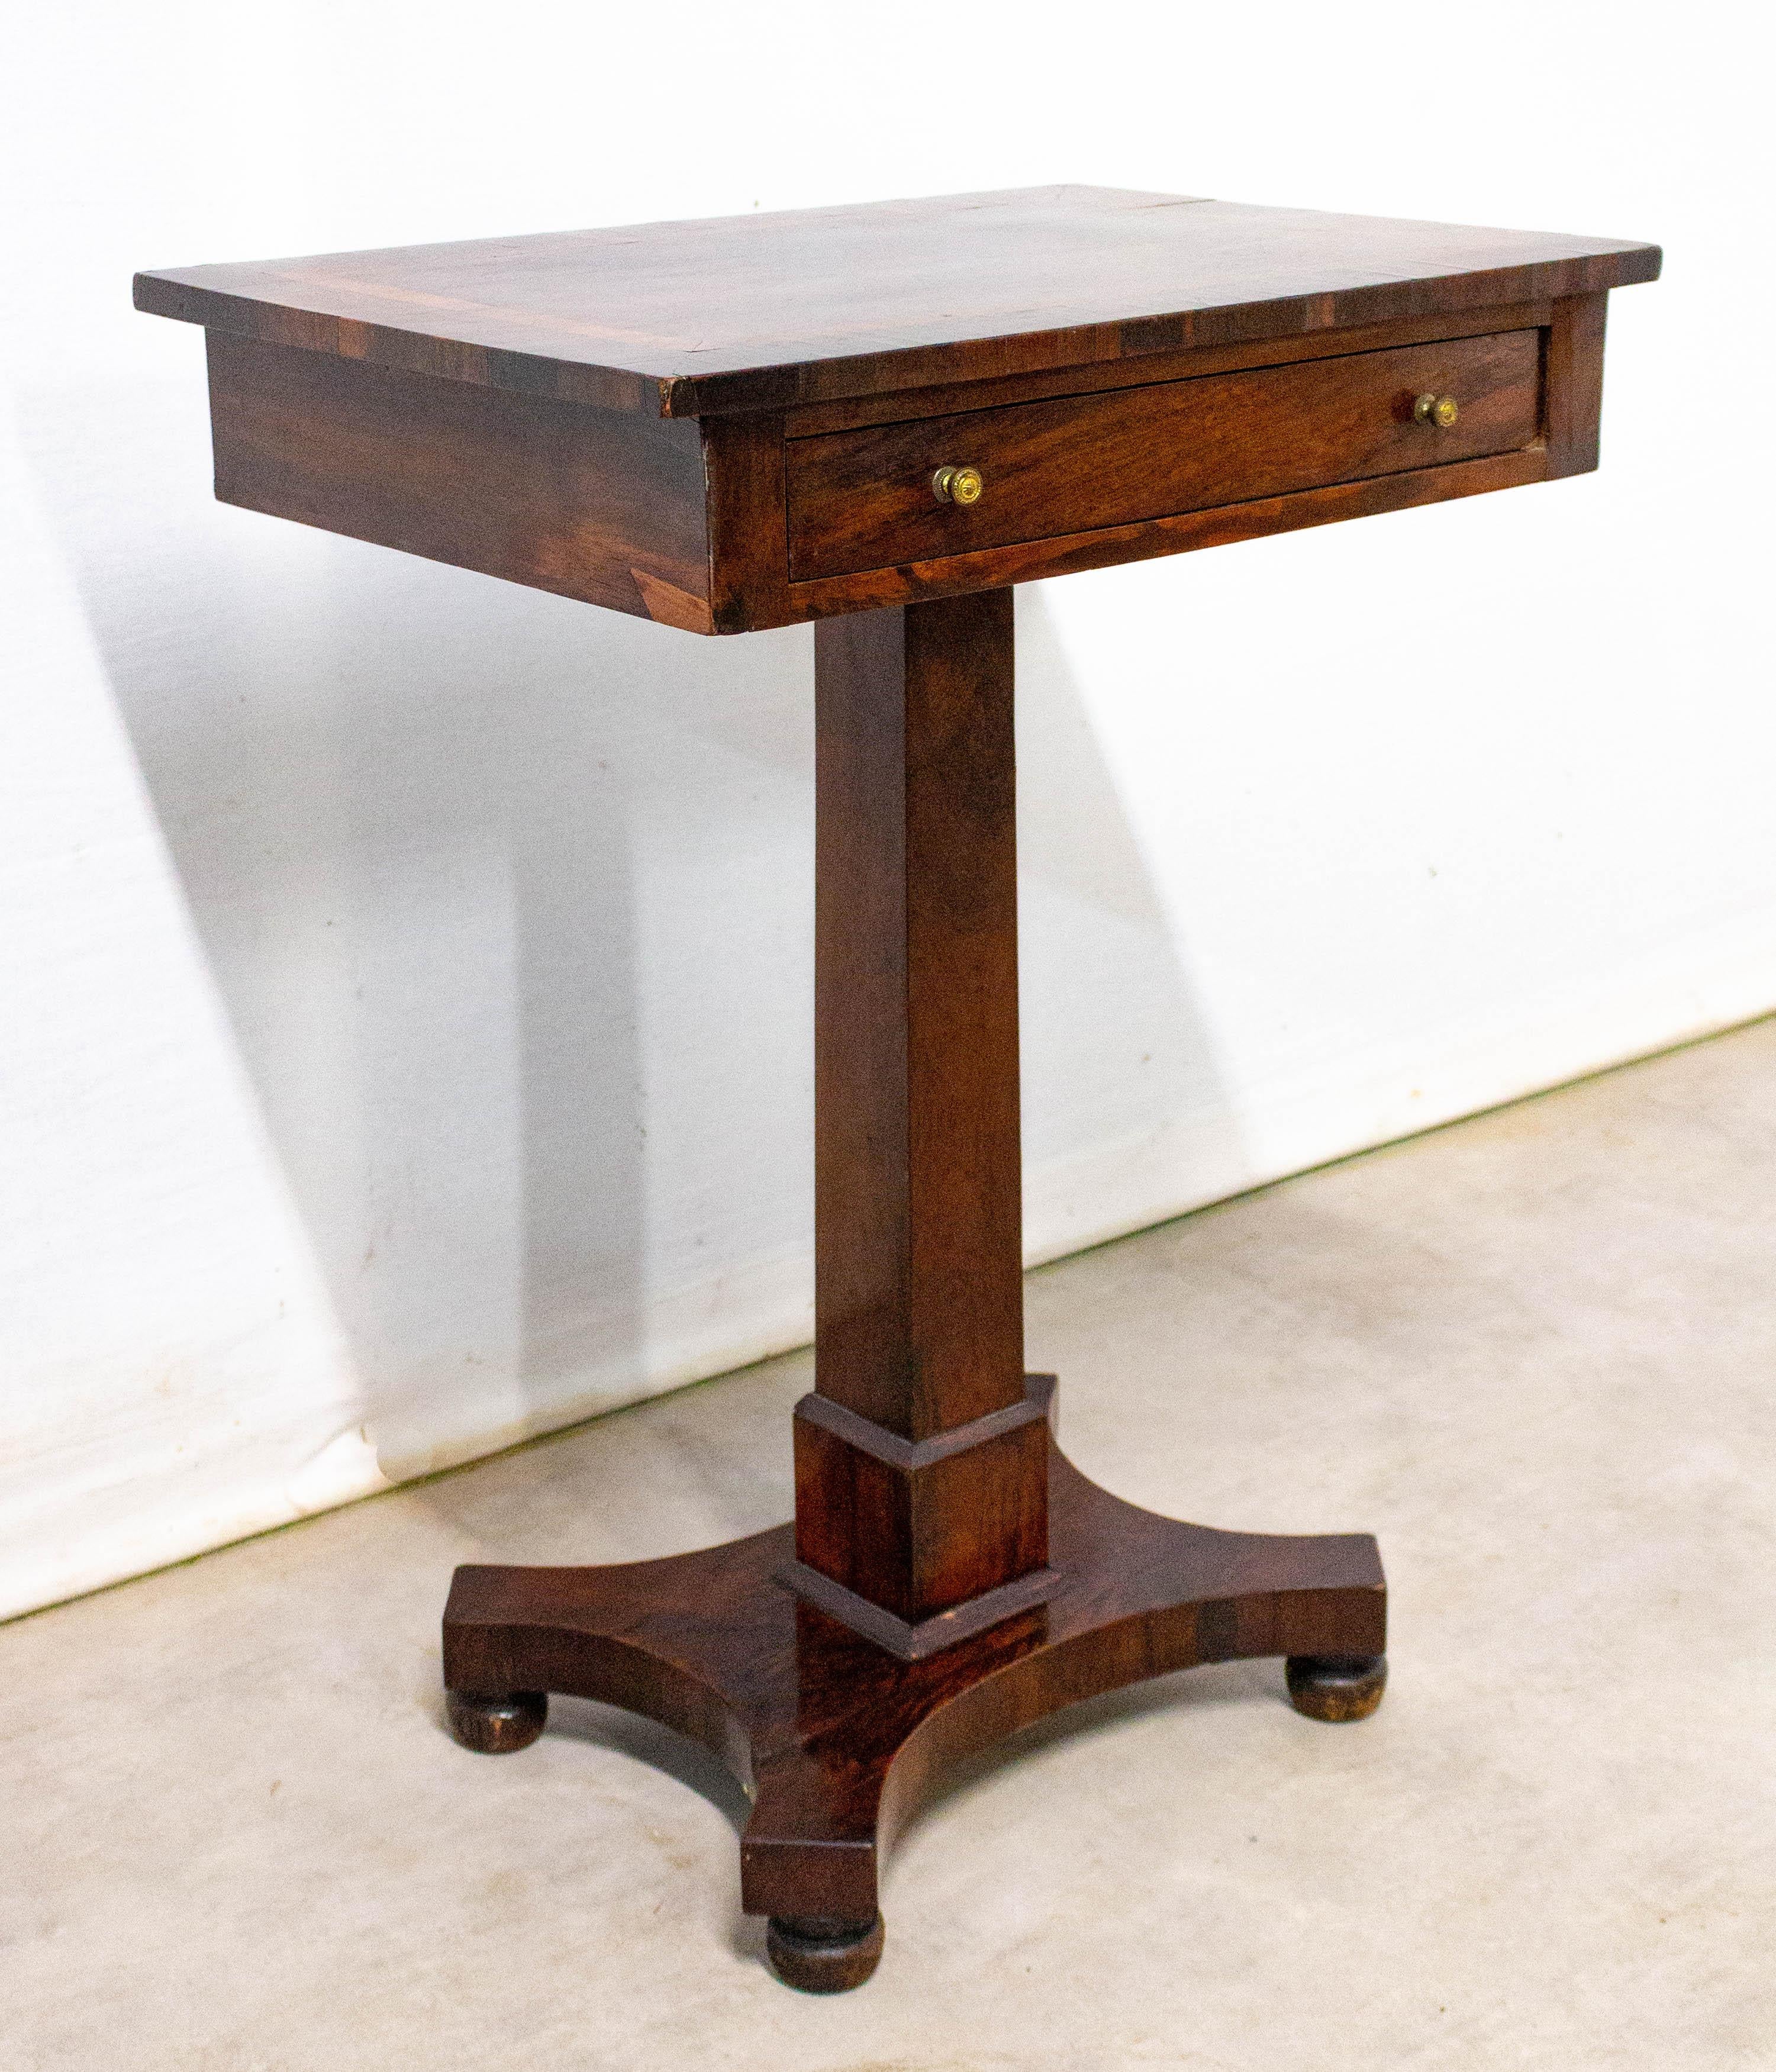 Sellette marquetry English side table, victorian.
Mid-19th century
Rosewood
Good antique condition 
Please see also: LU4476222827982 English Victorian Sellette Side Table, Mid-19th Century

Shipping:
40/55/72 cm 7.8 kg.
 